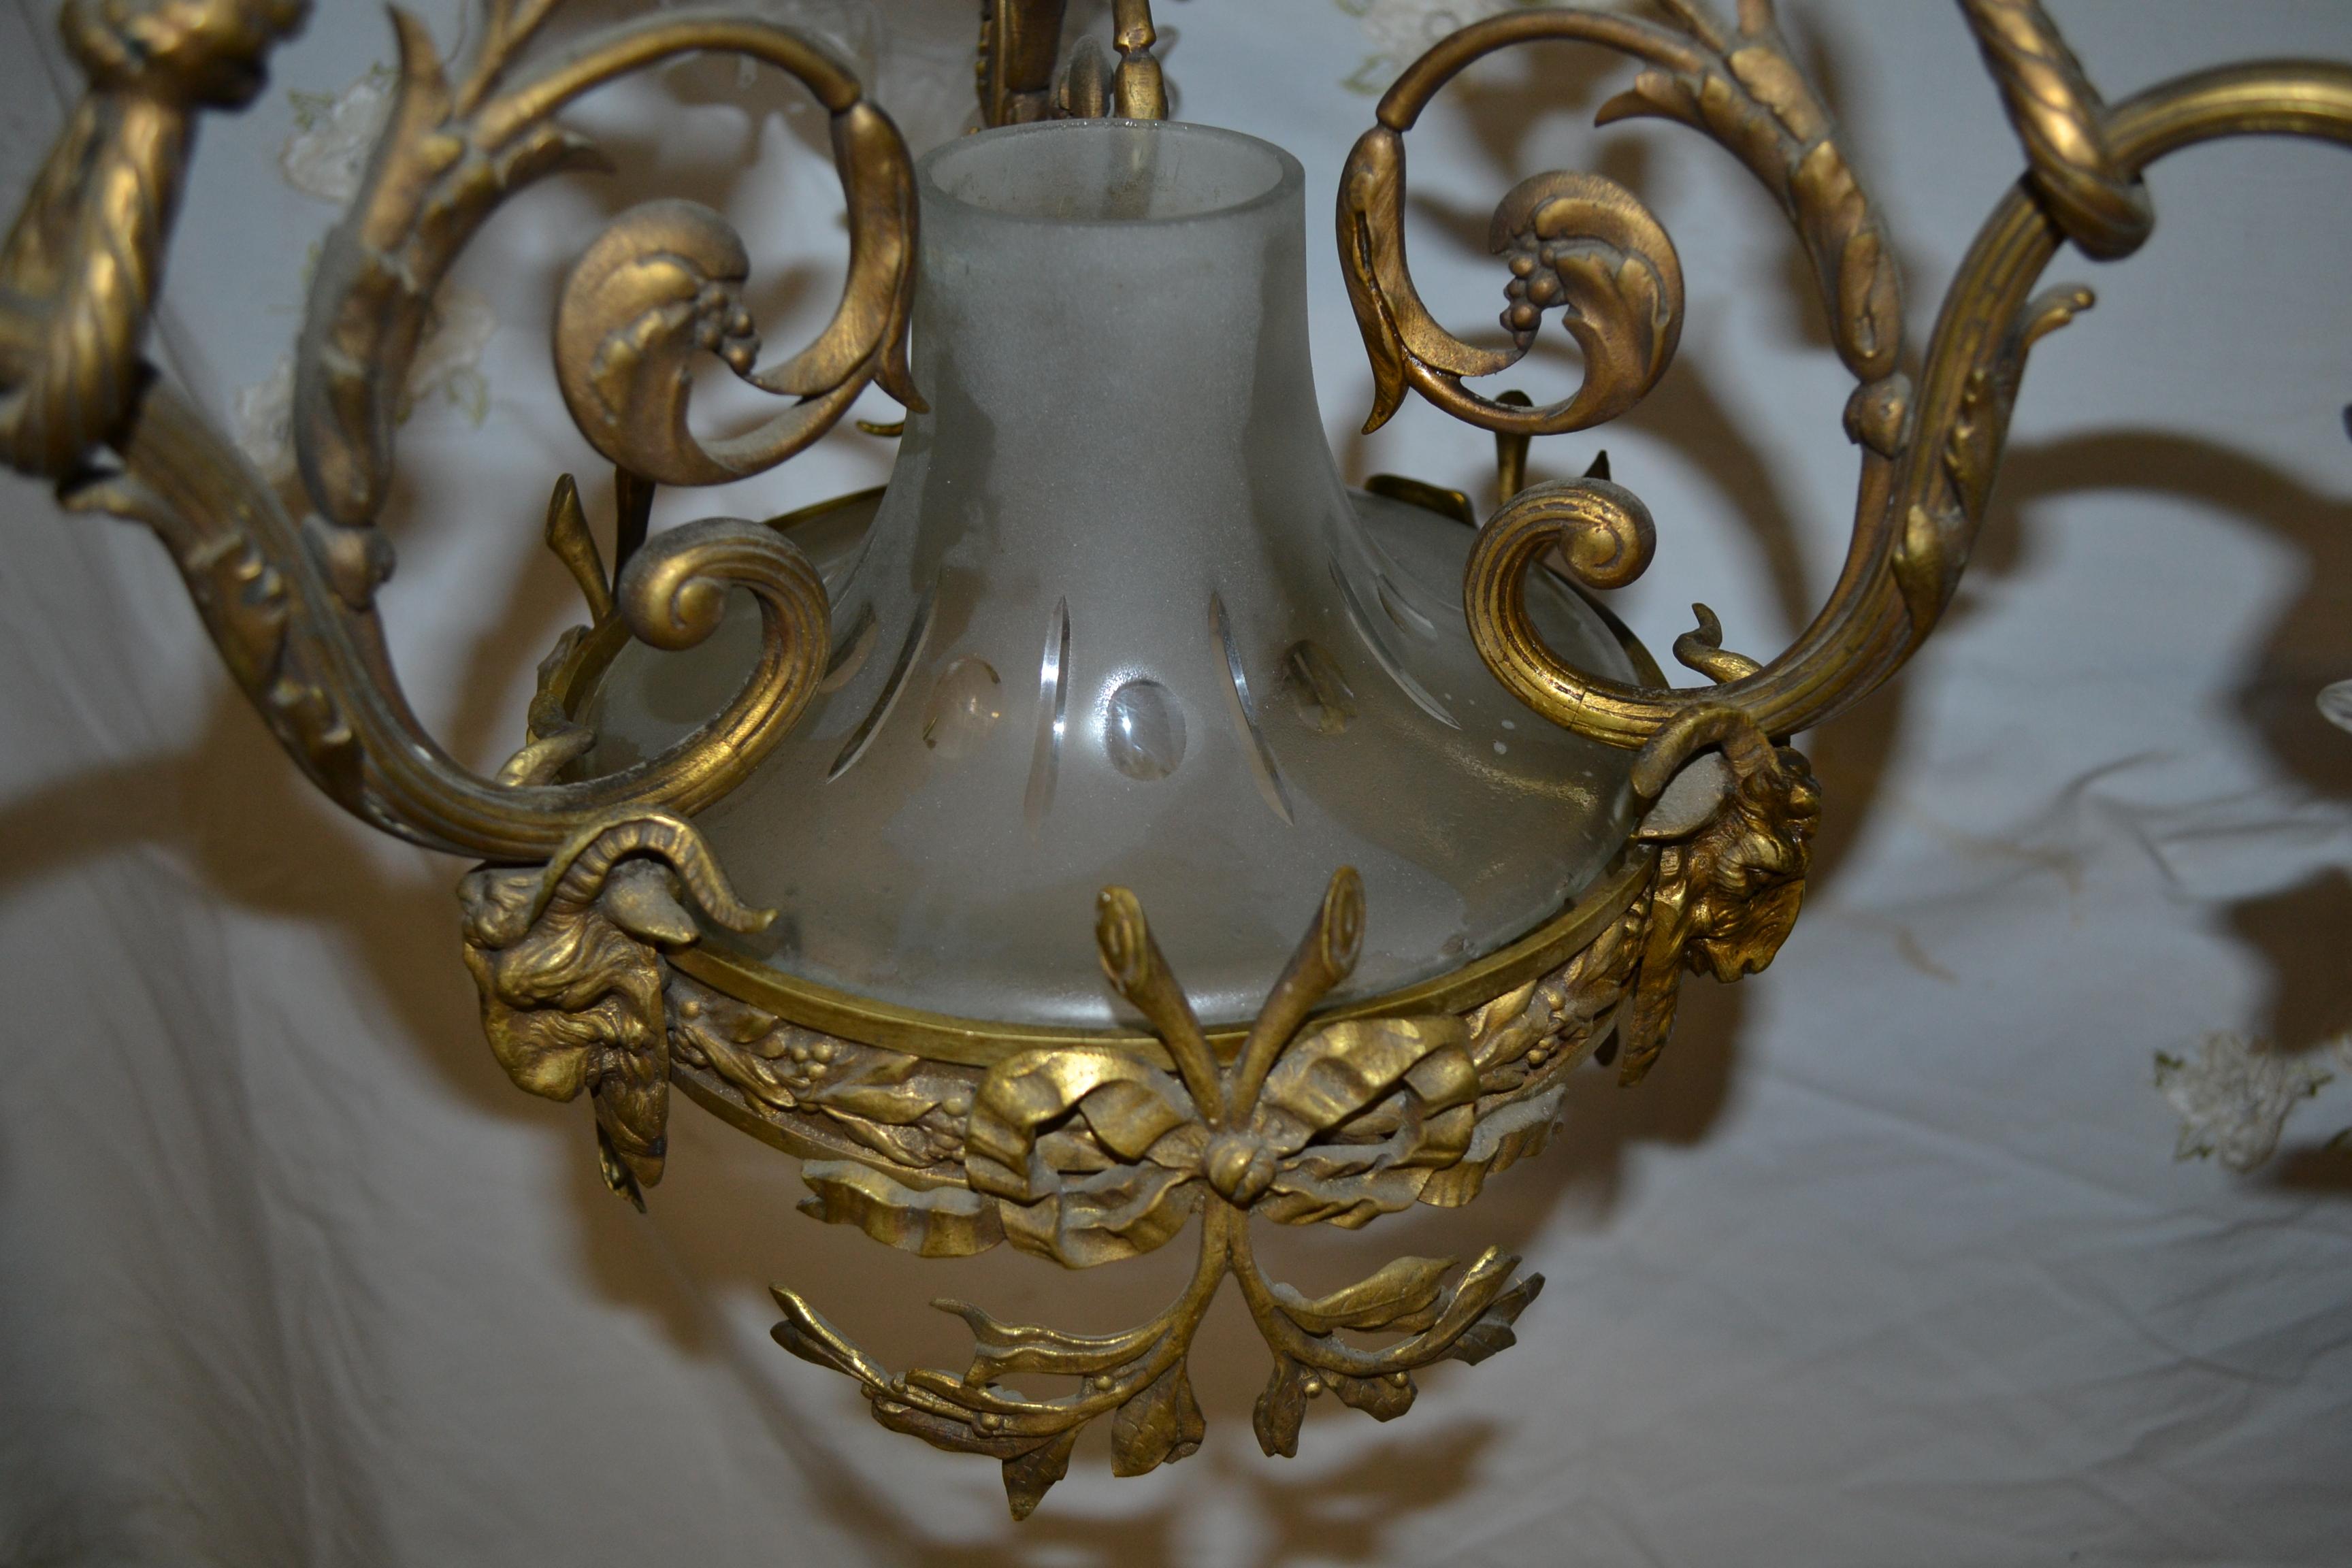 A very fine French 19th-20th century Belle Époque gilt bronze and patinated bronze three-light chandelier, with frosted glass shades shaped as flower petals, centred with a frosted edged-glass urn. Three main branches in the shape of rope lead to